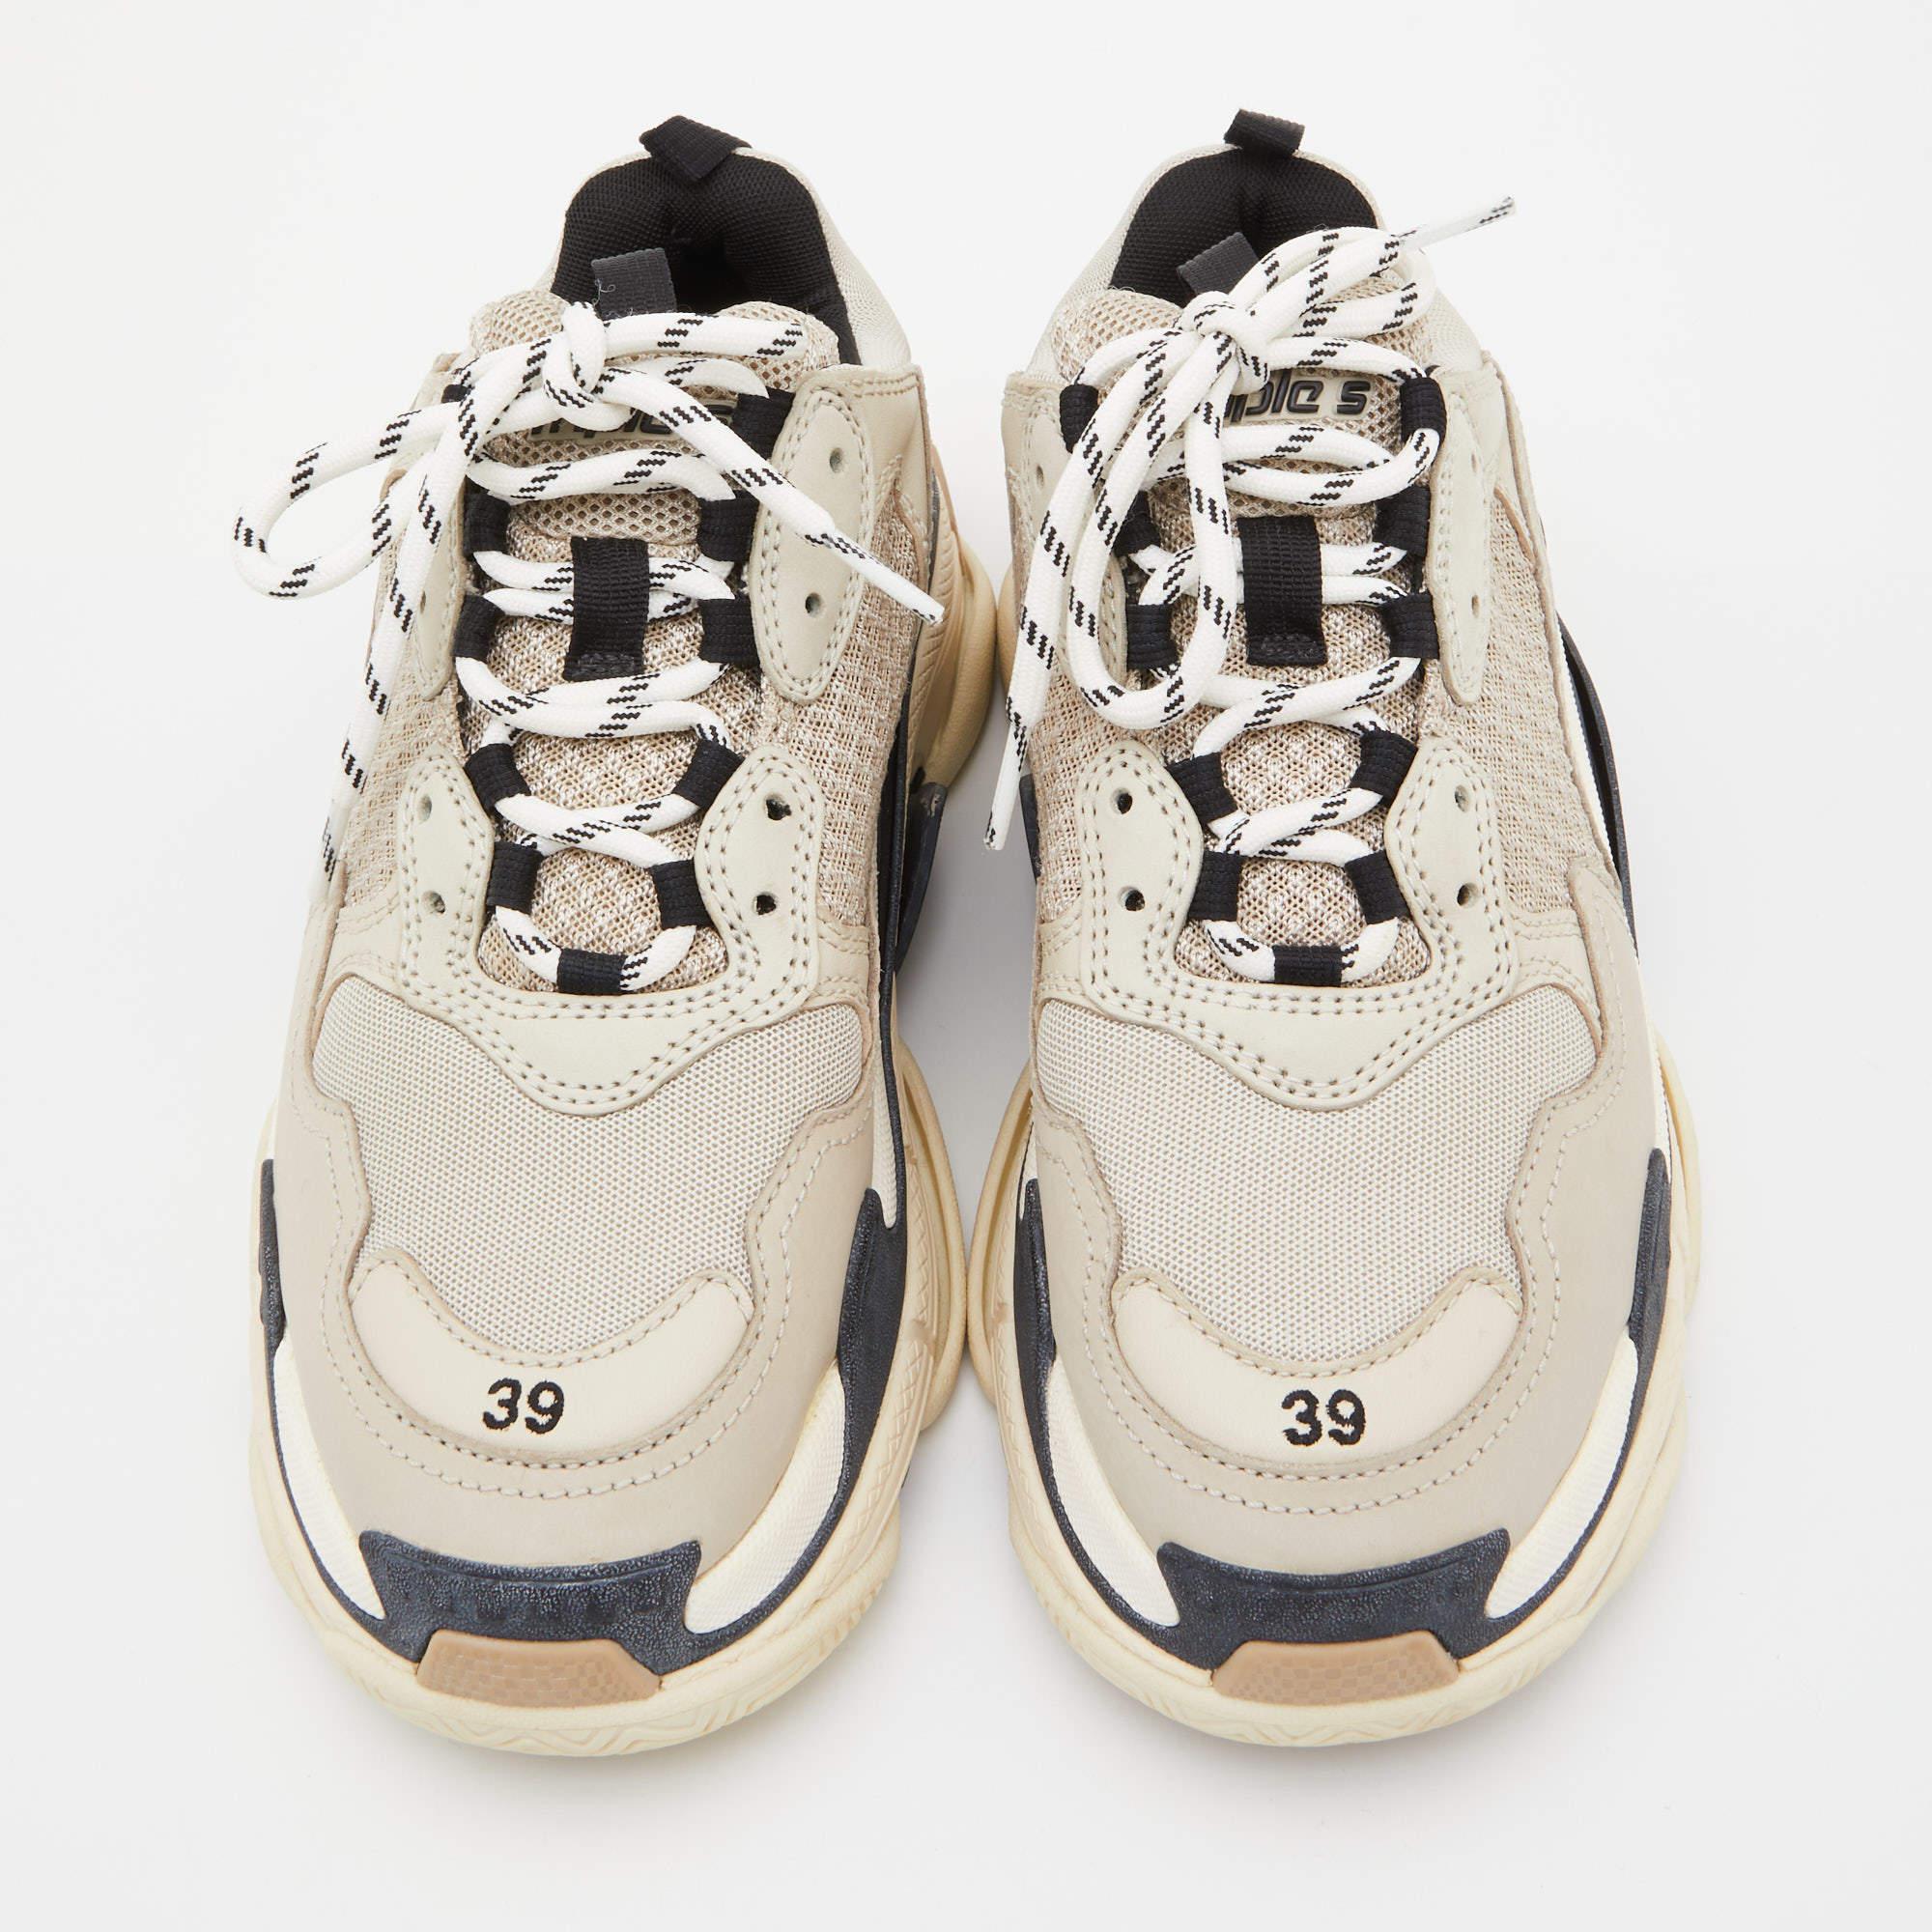 One of the finest pairs of sneakers to own today is the Triple S from Balenciaga. Crafted in a mix of materials, the shoes have branding details, lace-up closure, and stacked soles.

